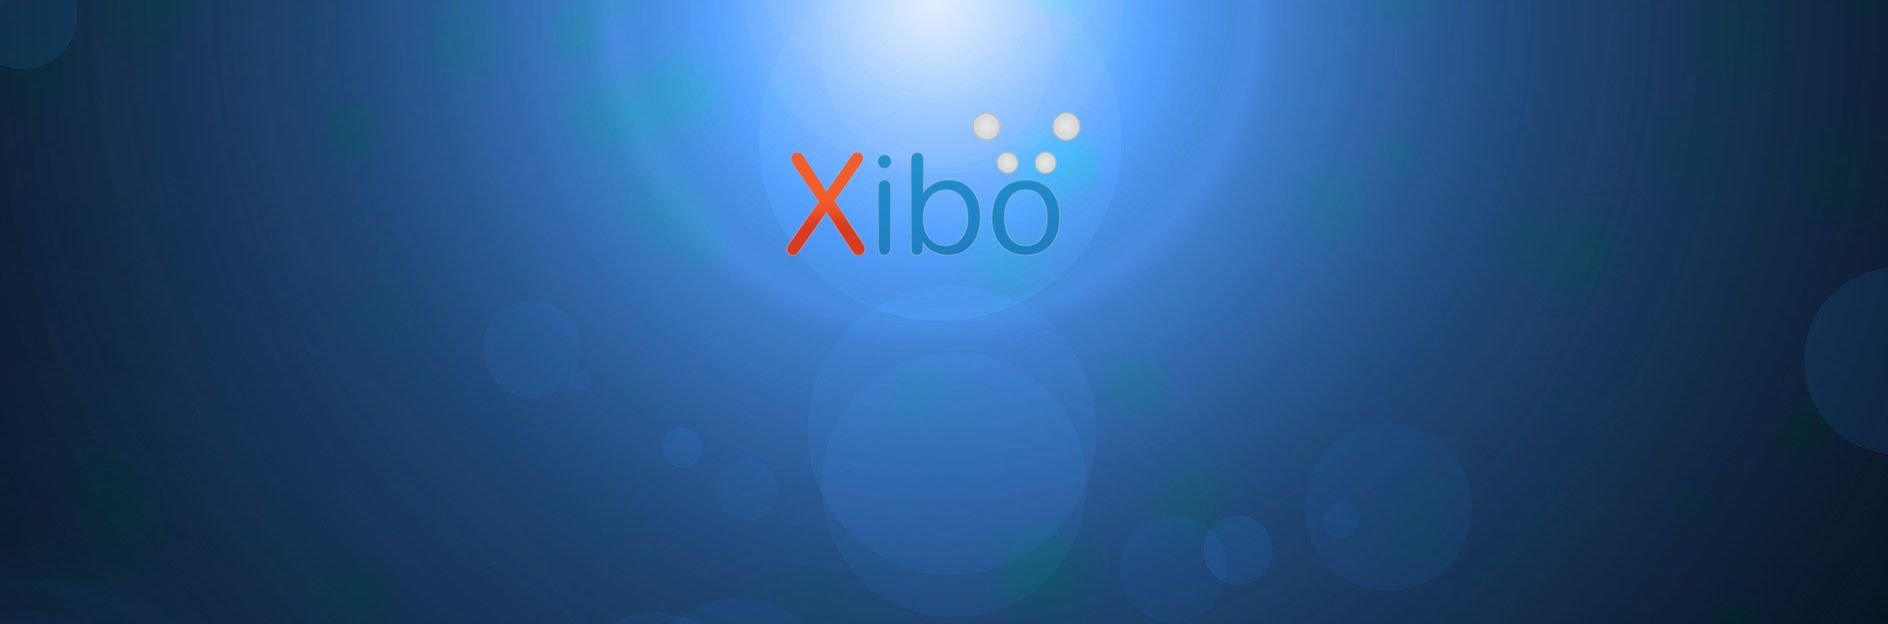 What's new in Xibo version 3